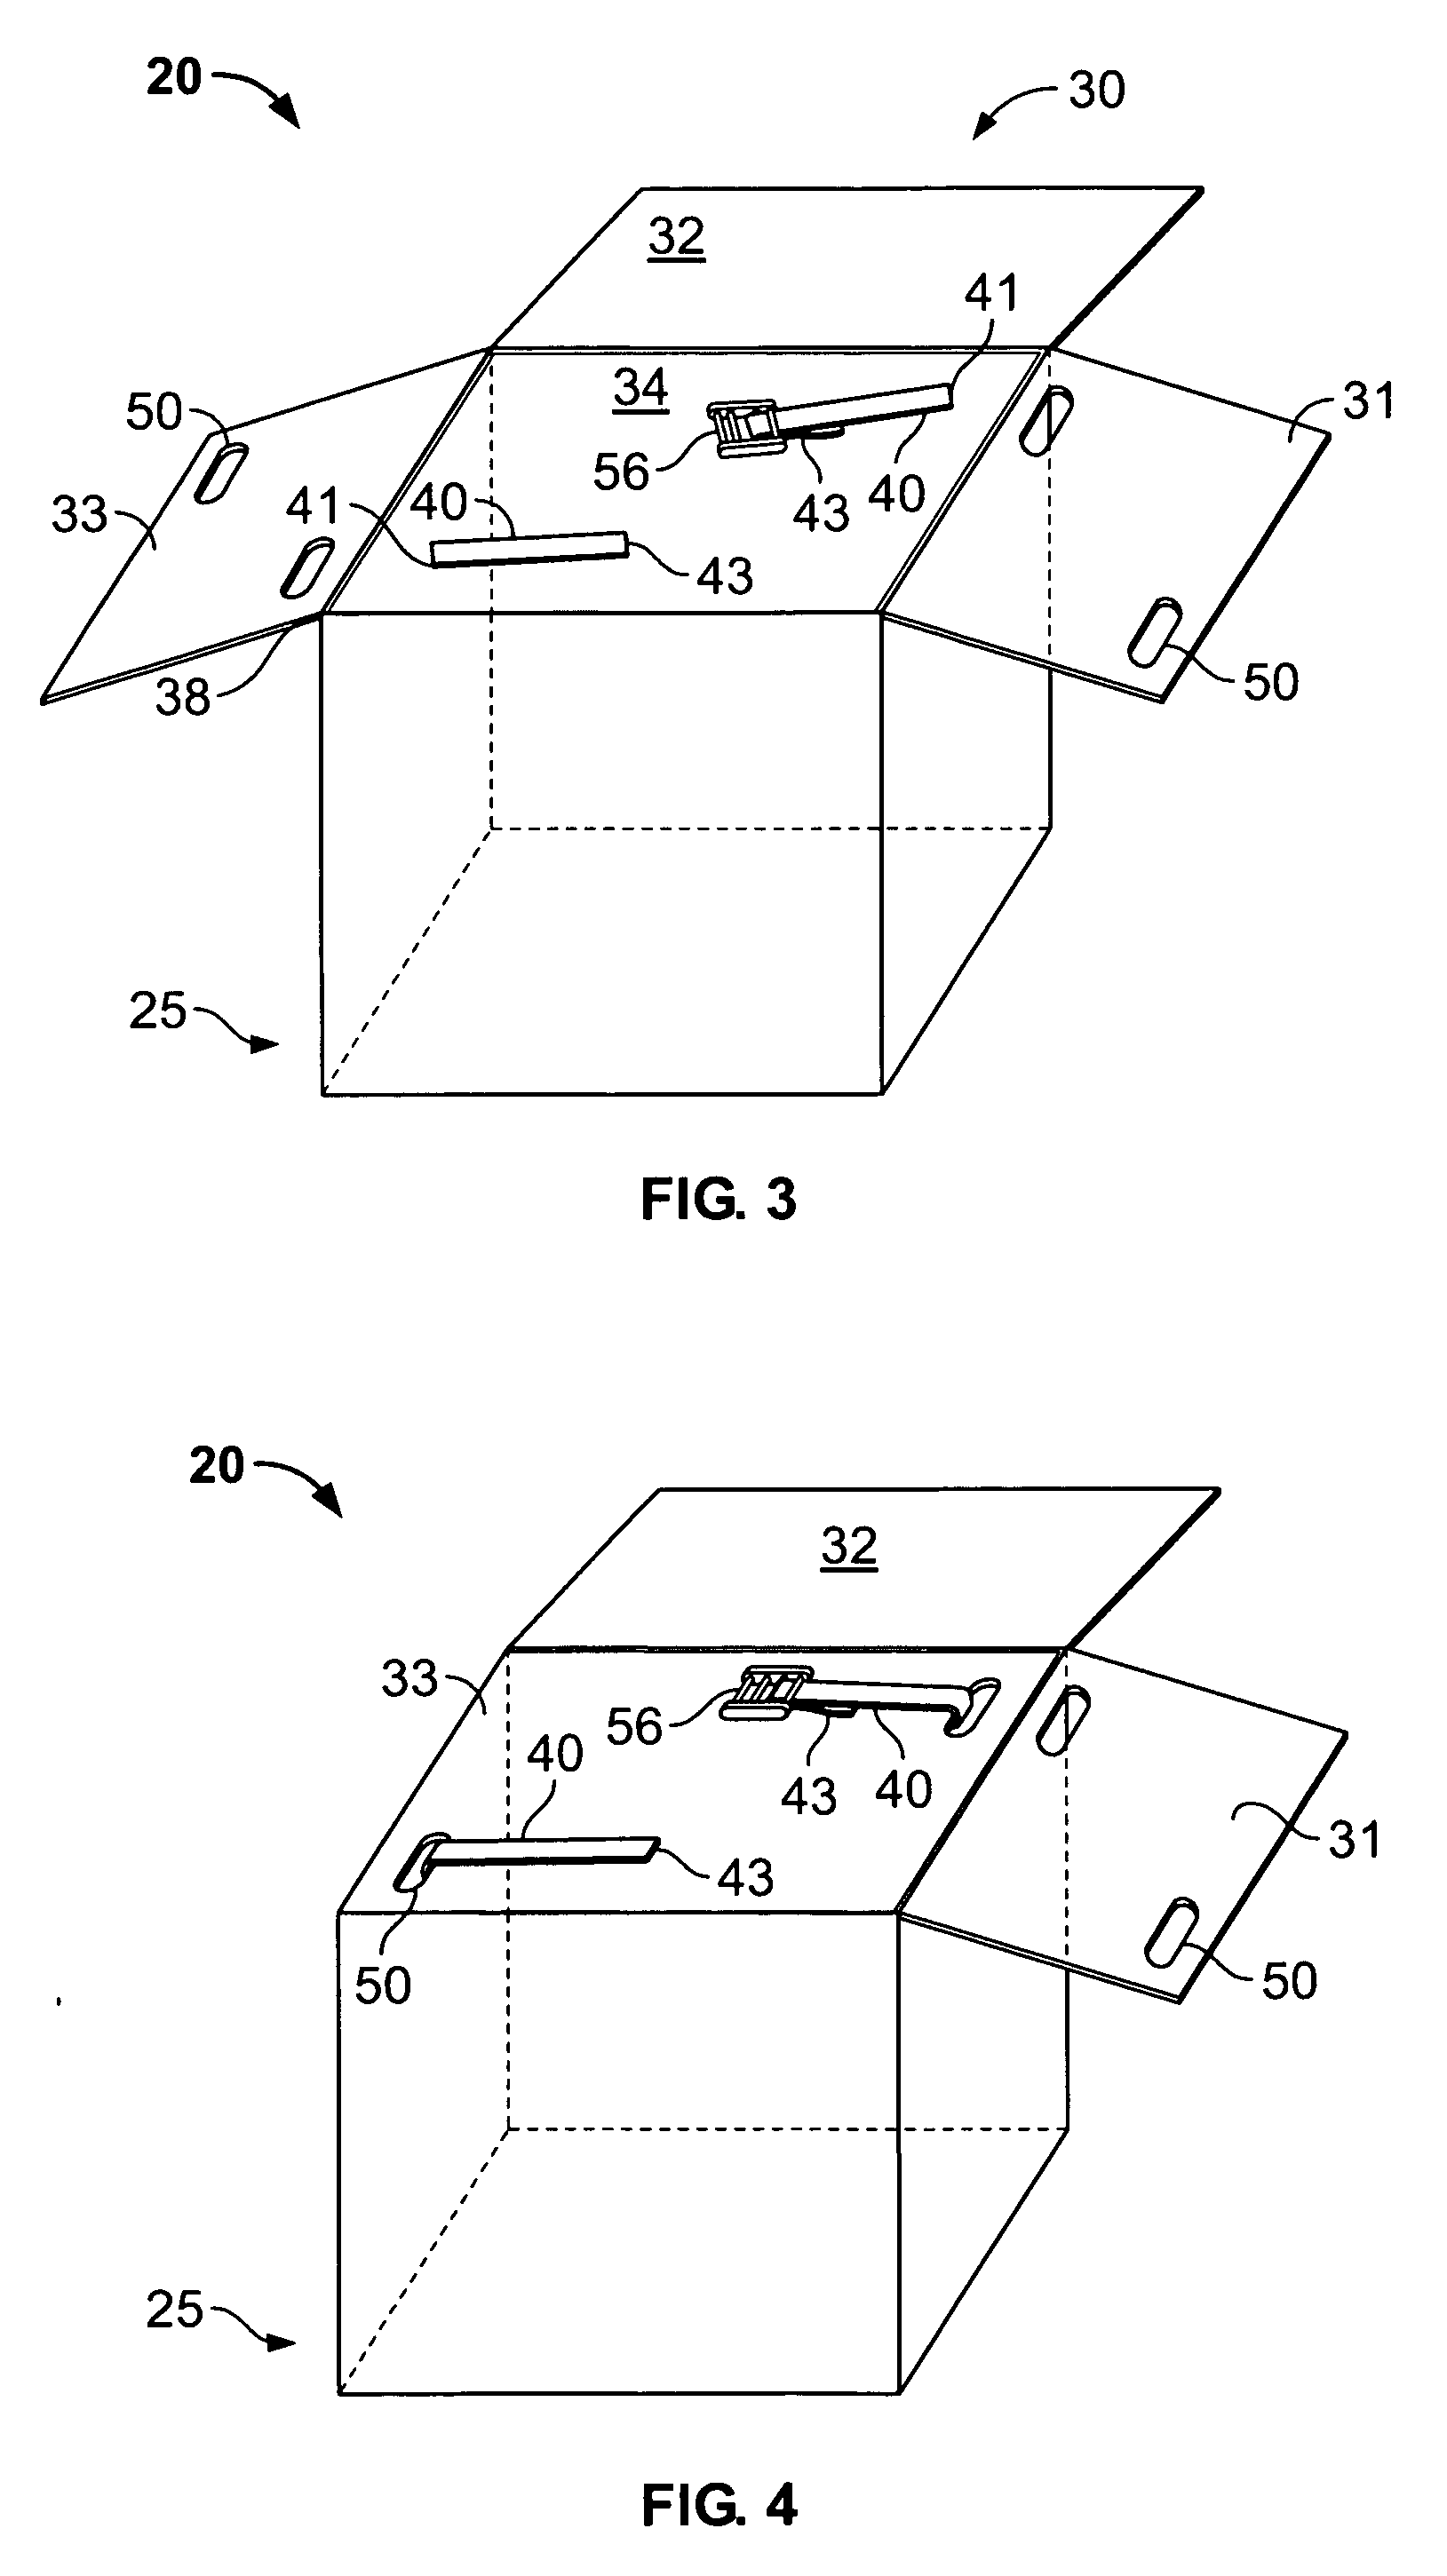 Shoreline erosion and flood control system and method